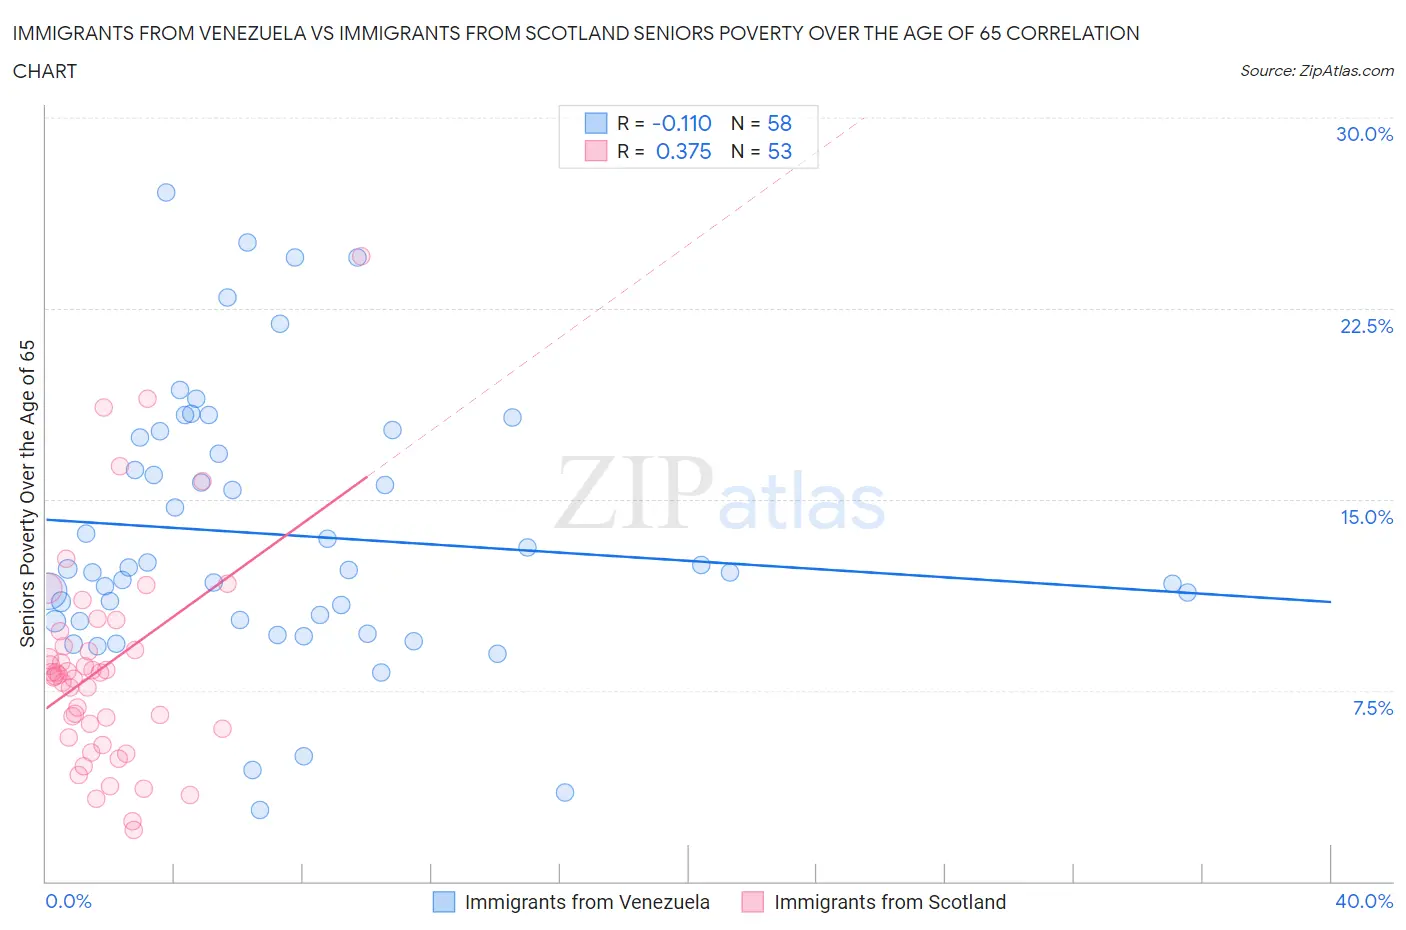 Immigrants from Venezuela vs Immigrants from Scotland Seniors Poverty Over the Age of 65